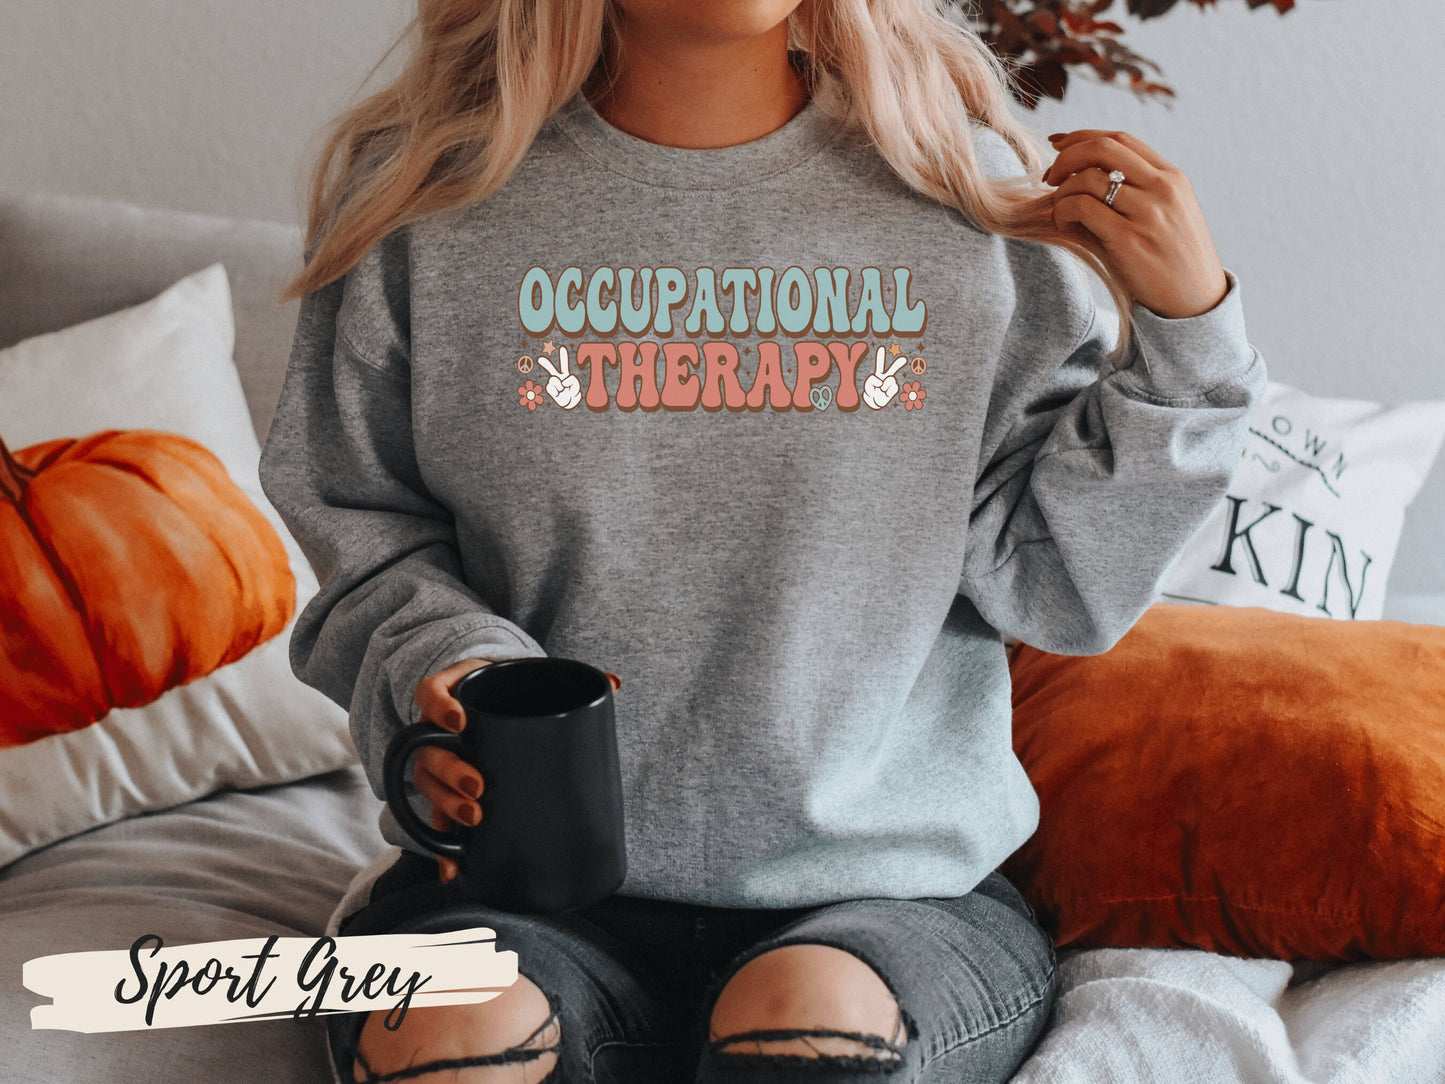 Occupational Therapy Shirt, Occupational Therapy Gifts, Doctor of Occupational Therapy, Occupational Therapy Sweatshirt, OT Gift,